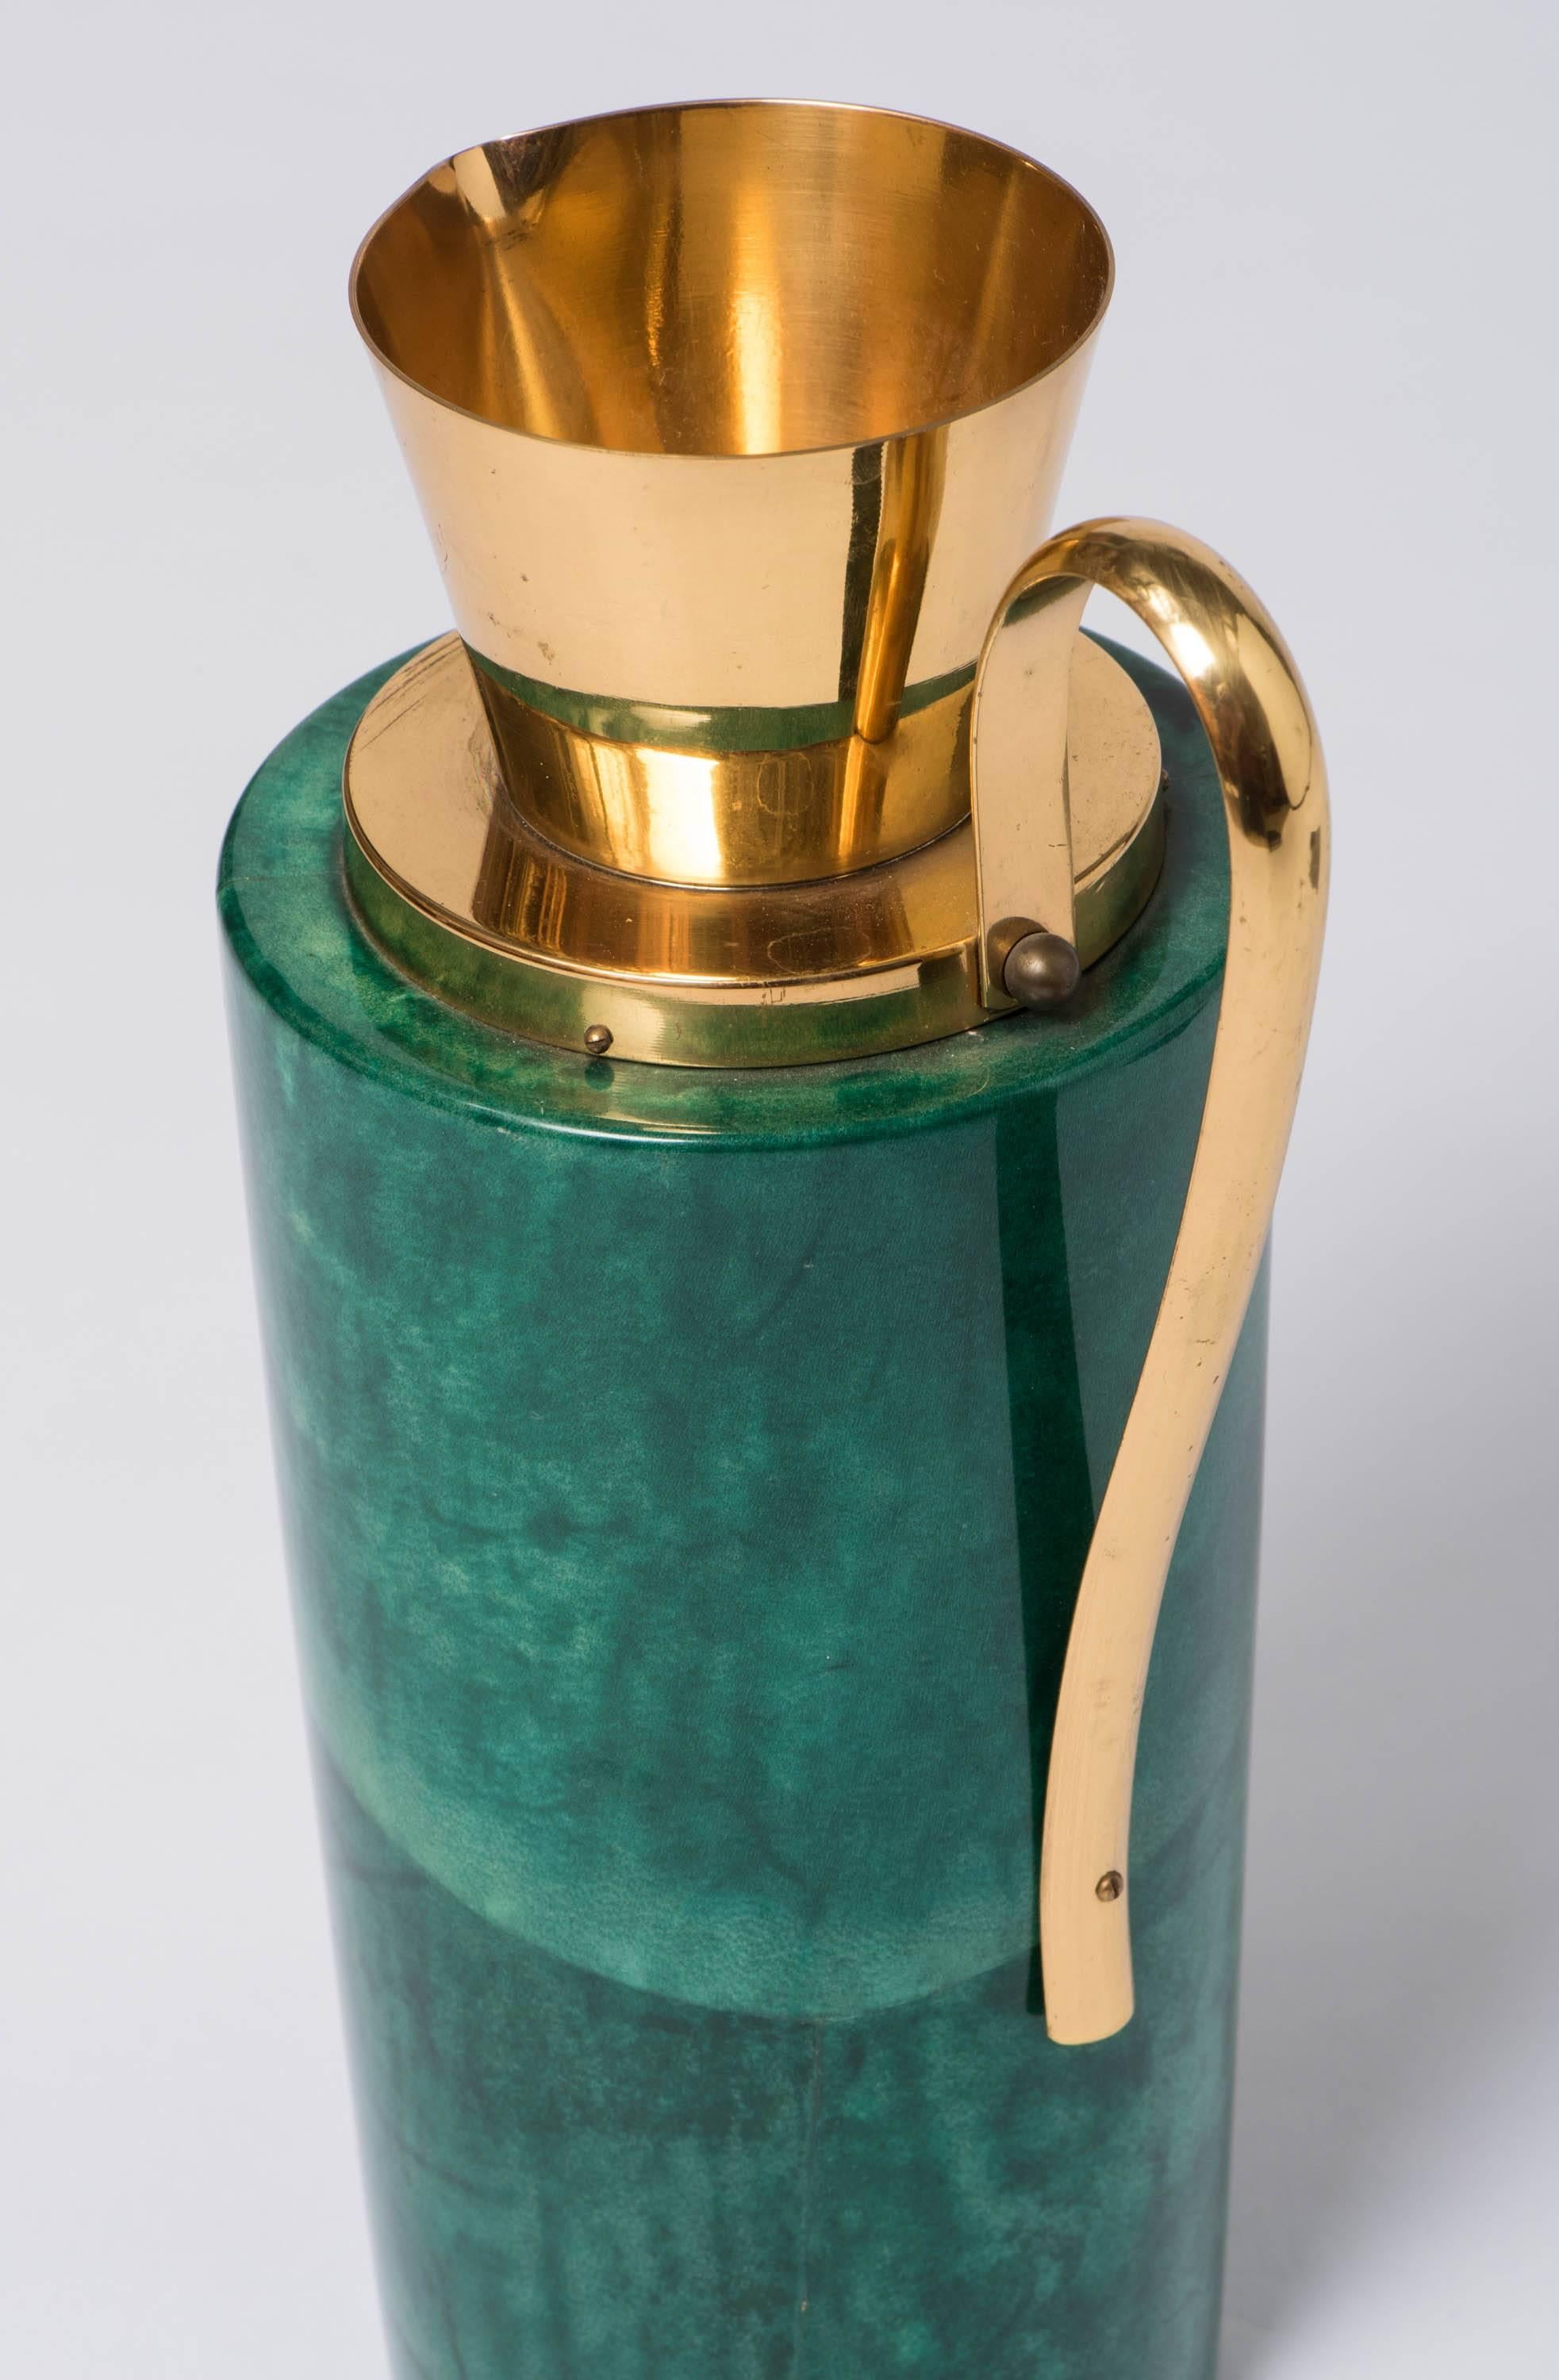 Aldo Tura green lacquered parchment carafe with brass mounts, Italy circa 1940 In Excellent Condition For Sale In Macclesfield, Cheshire